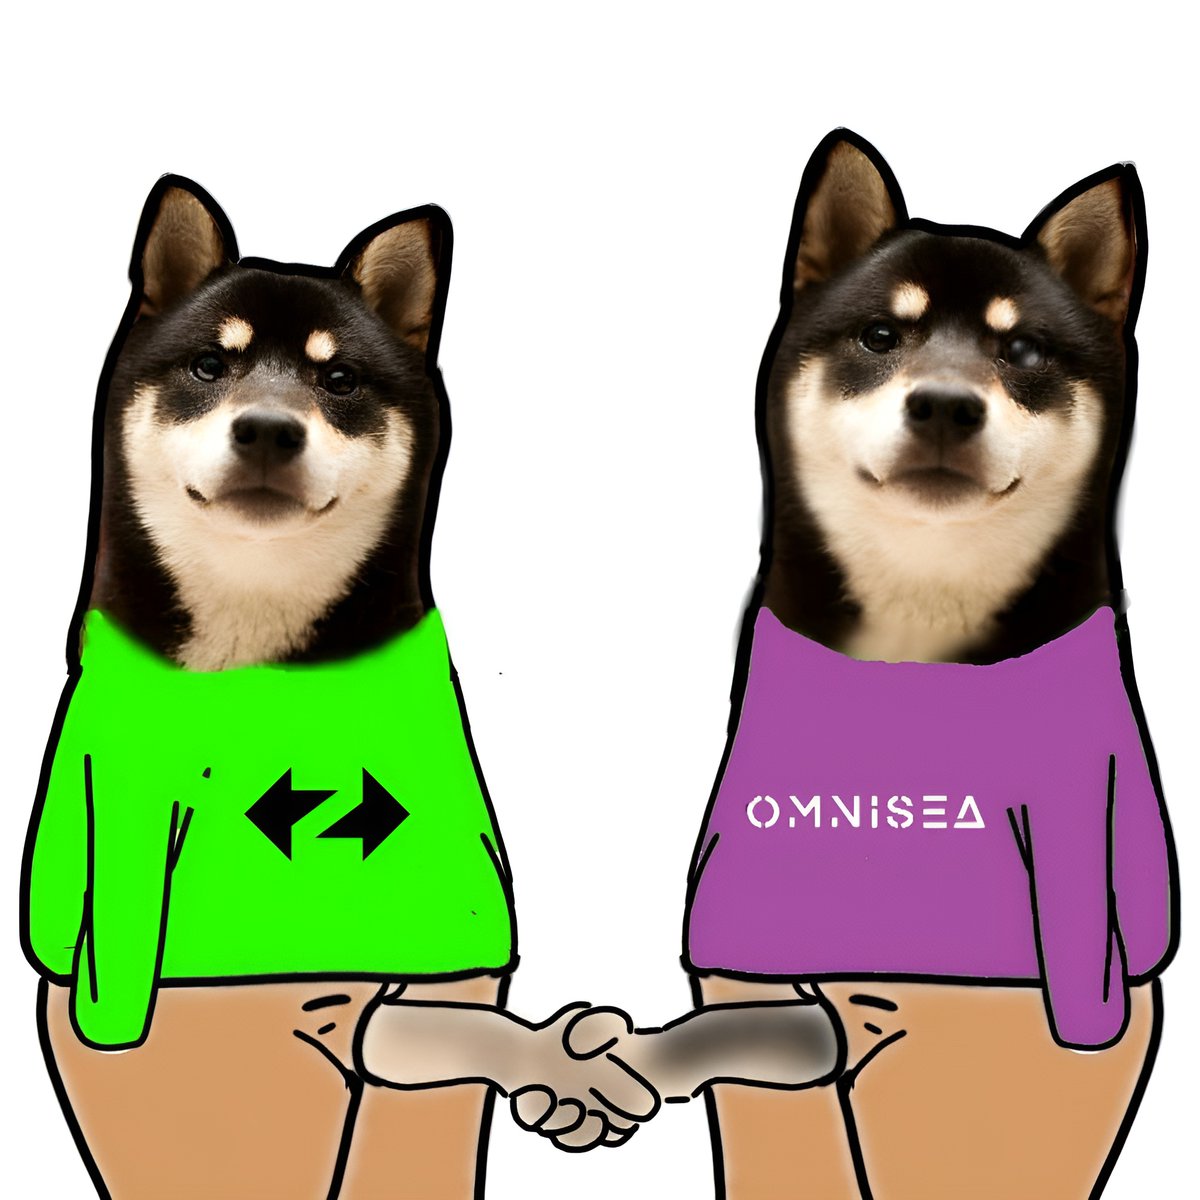 We announce Allocation for holders NFT Boos DOG & CEO Baby Dog 🐕 (10% Supply Total 100% TGE ✅) 🦮 Boos DOG Collection Link 👔: omnisea.org/RoD6wMIV1GqMGC… Supply : 800 Price : 0.005 $ETH Limit : 20 per wallet We will give 6% (100% TGE ✅) 🦮 CEO Baby Dog Collection Link: